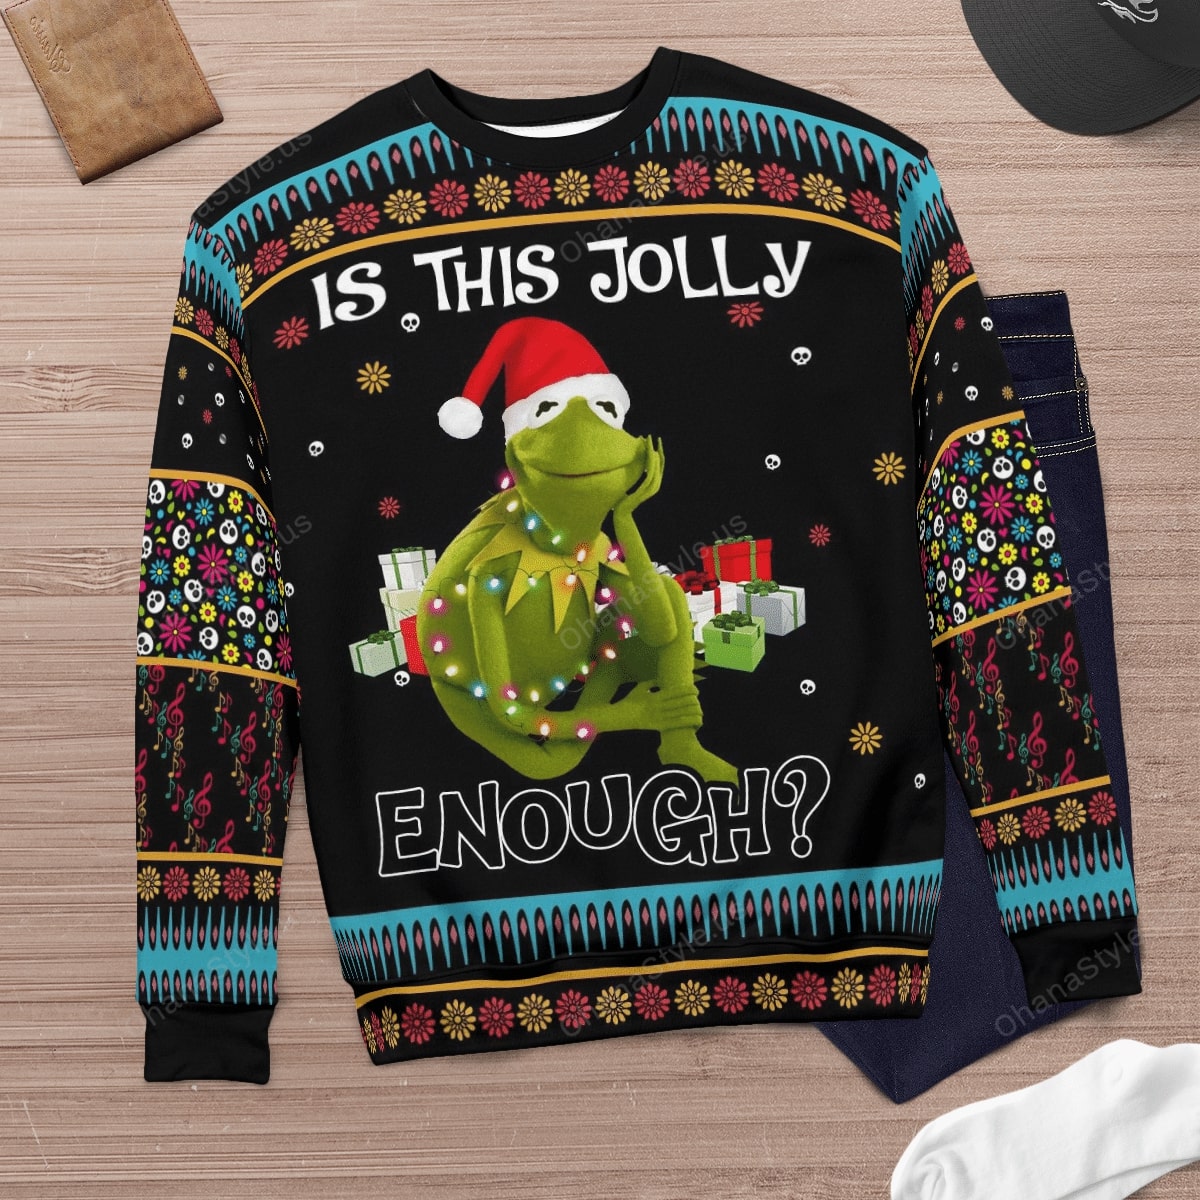 [ Amazing ] Kermit the Frog muppet Is this jolly enough christmas sweater – Saleoff 031221